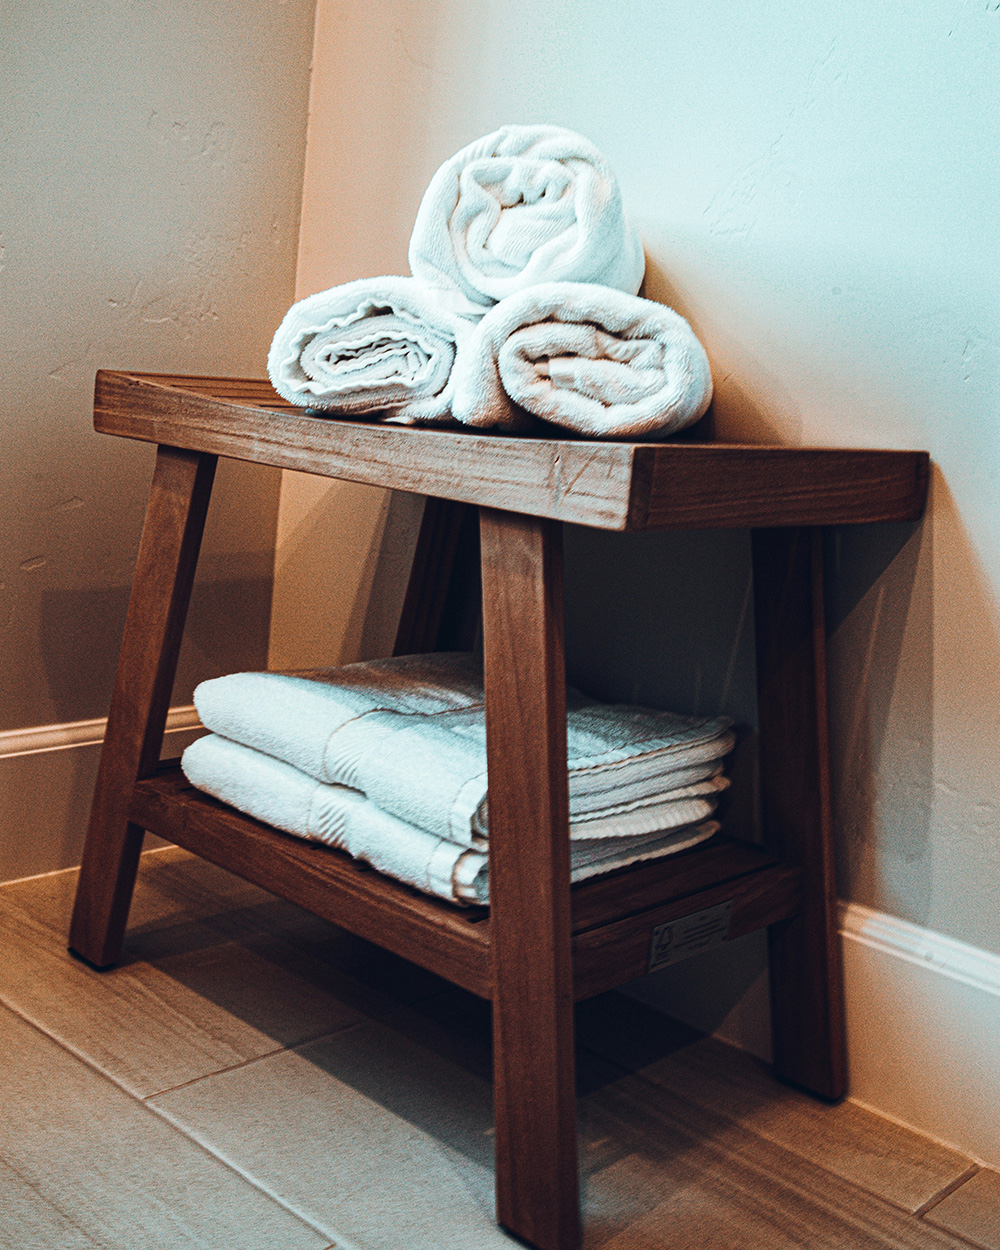 Wooden bath stool with storage for towels, white towels folded underneath, and white towels rolled and organized on top.